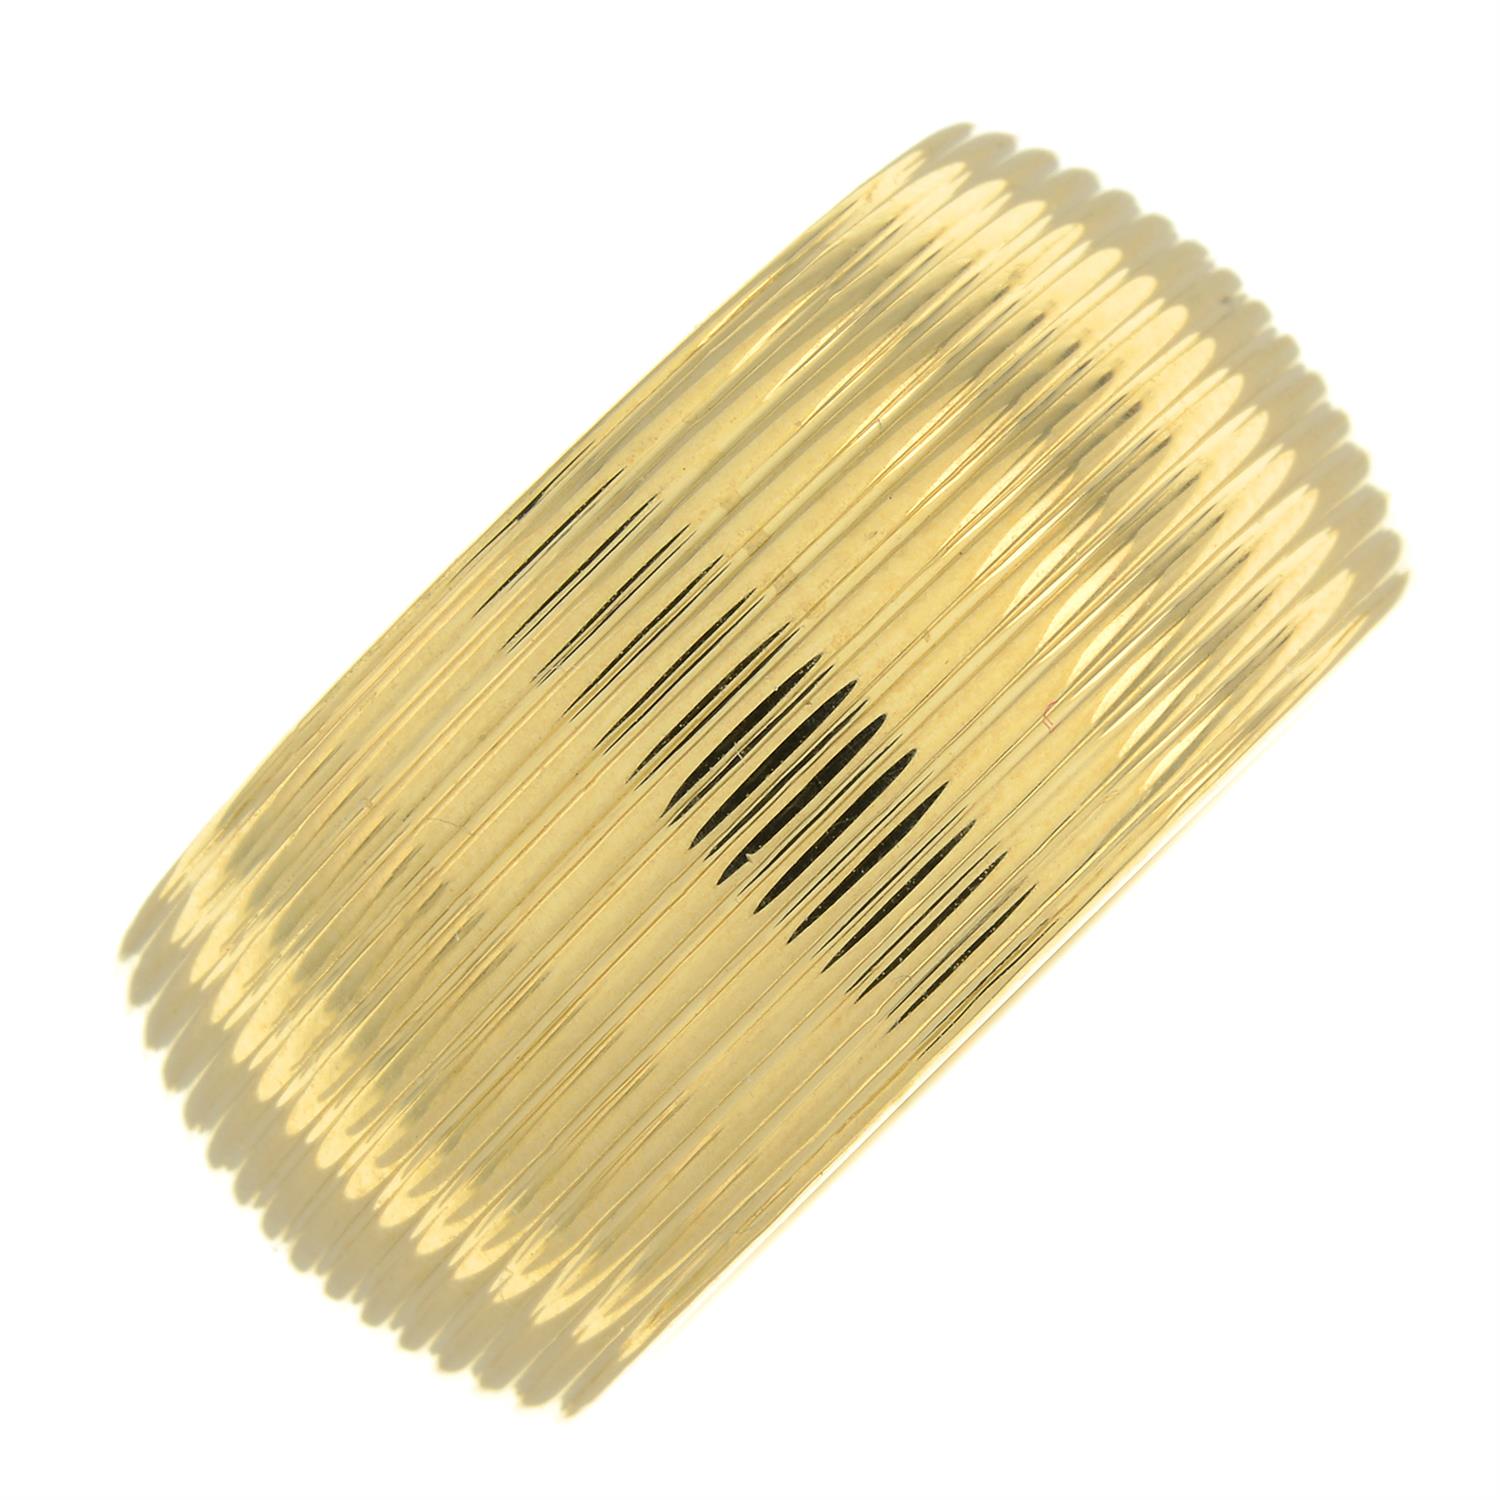 18ct gold grooved band ring - Image 2 of 5